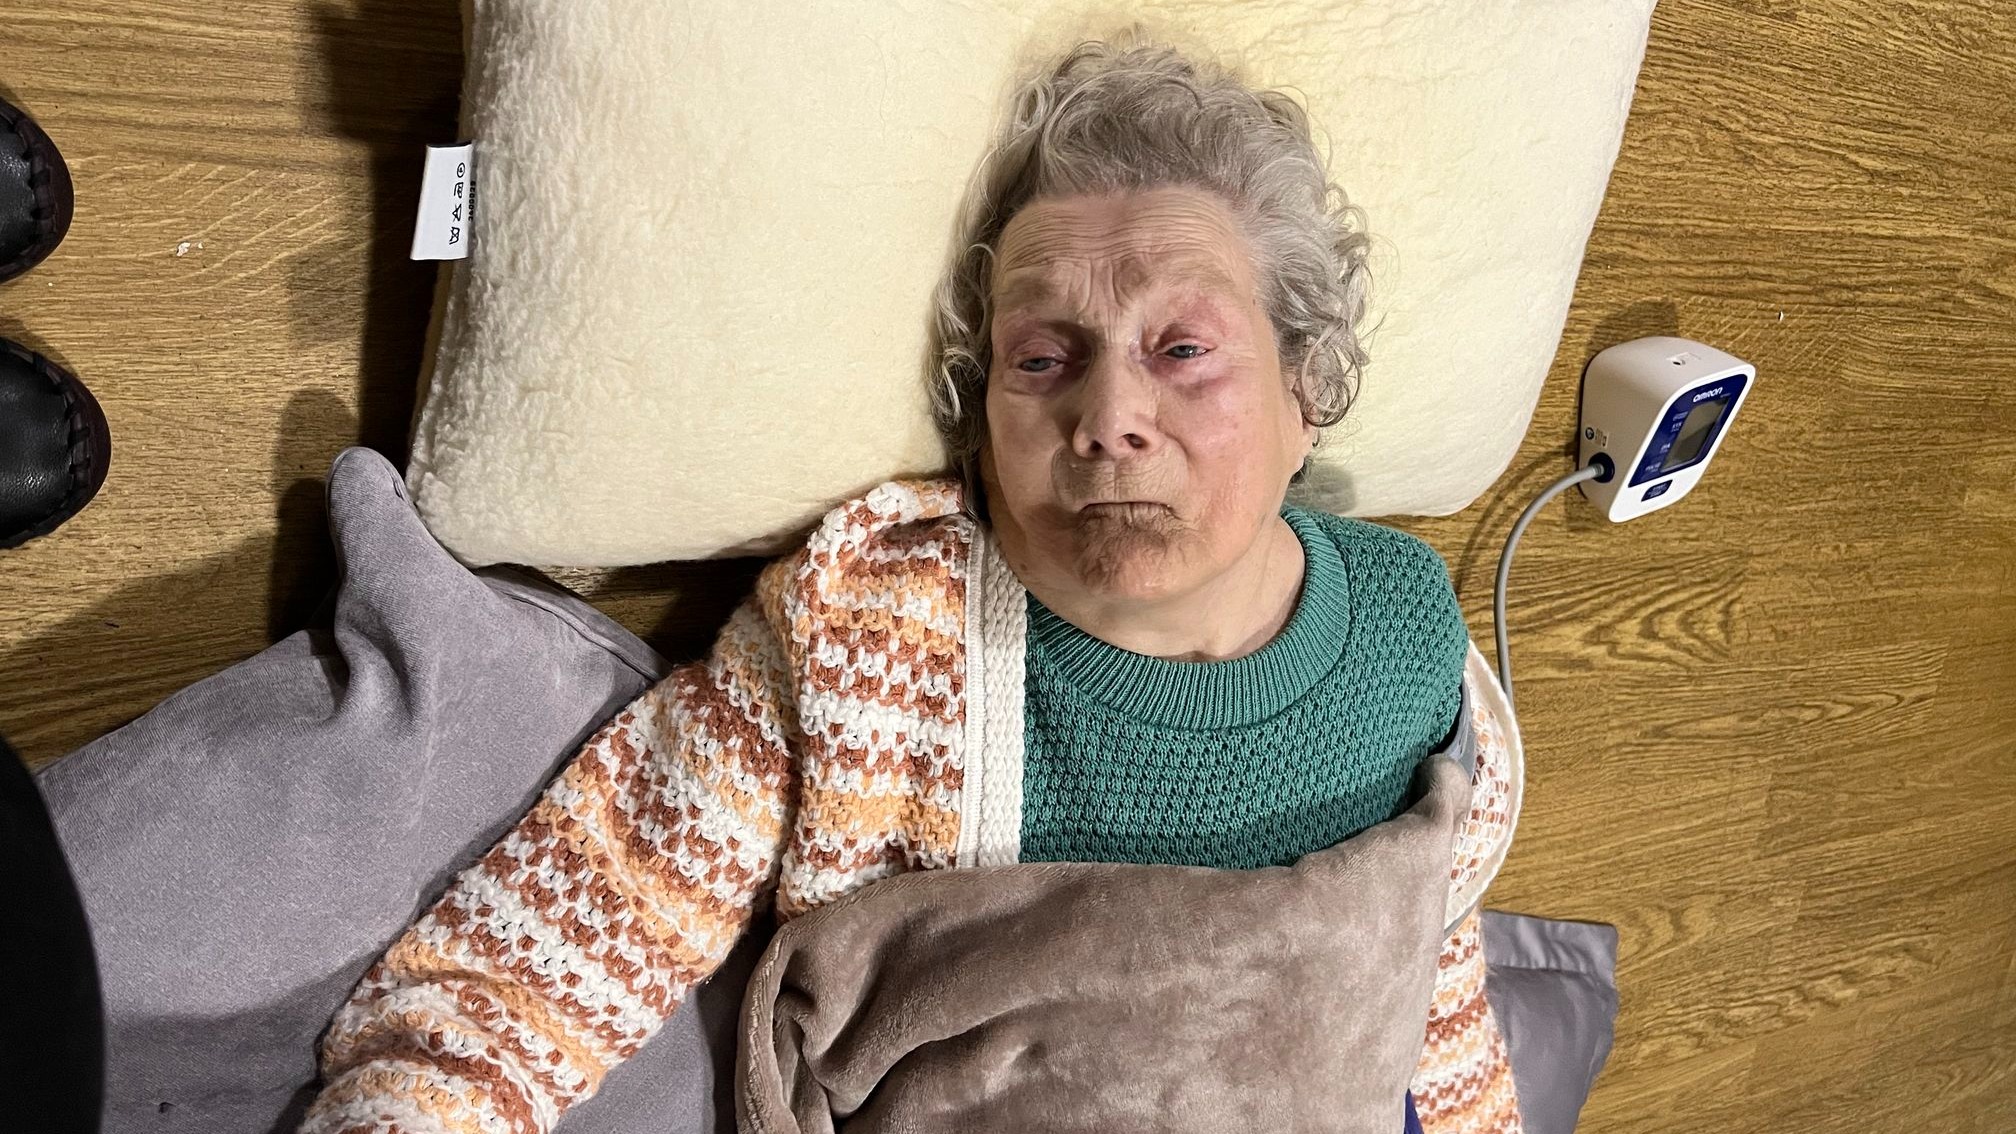 Woman, 93, left ‘screaming in pain’ in 25-hour wait for ambulance on care home floor